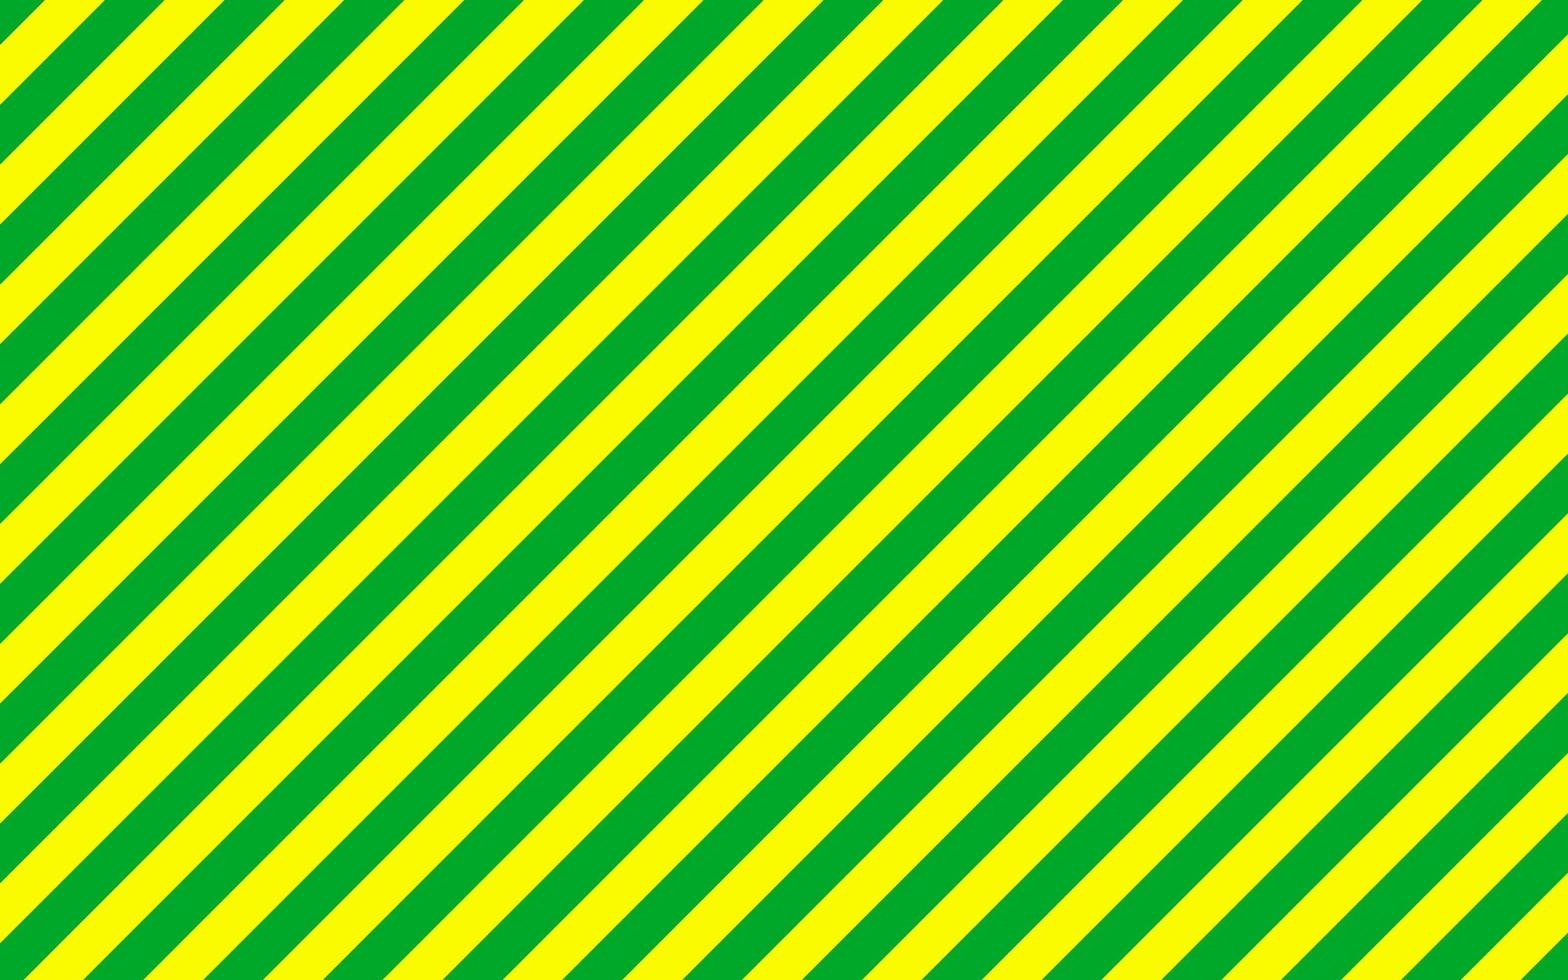 Seamless diagonal green and yellow pattern stripe background. Simple and soft diagonal striped background. Retro and vintage design concept. Suitable for leaflet, brochure, poster, backdrop, etc. photo